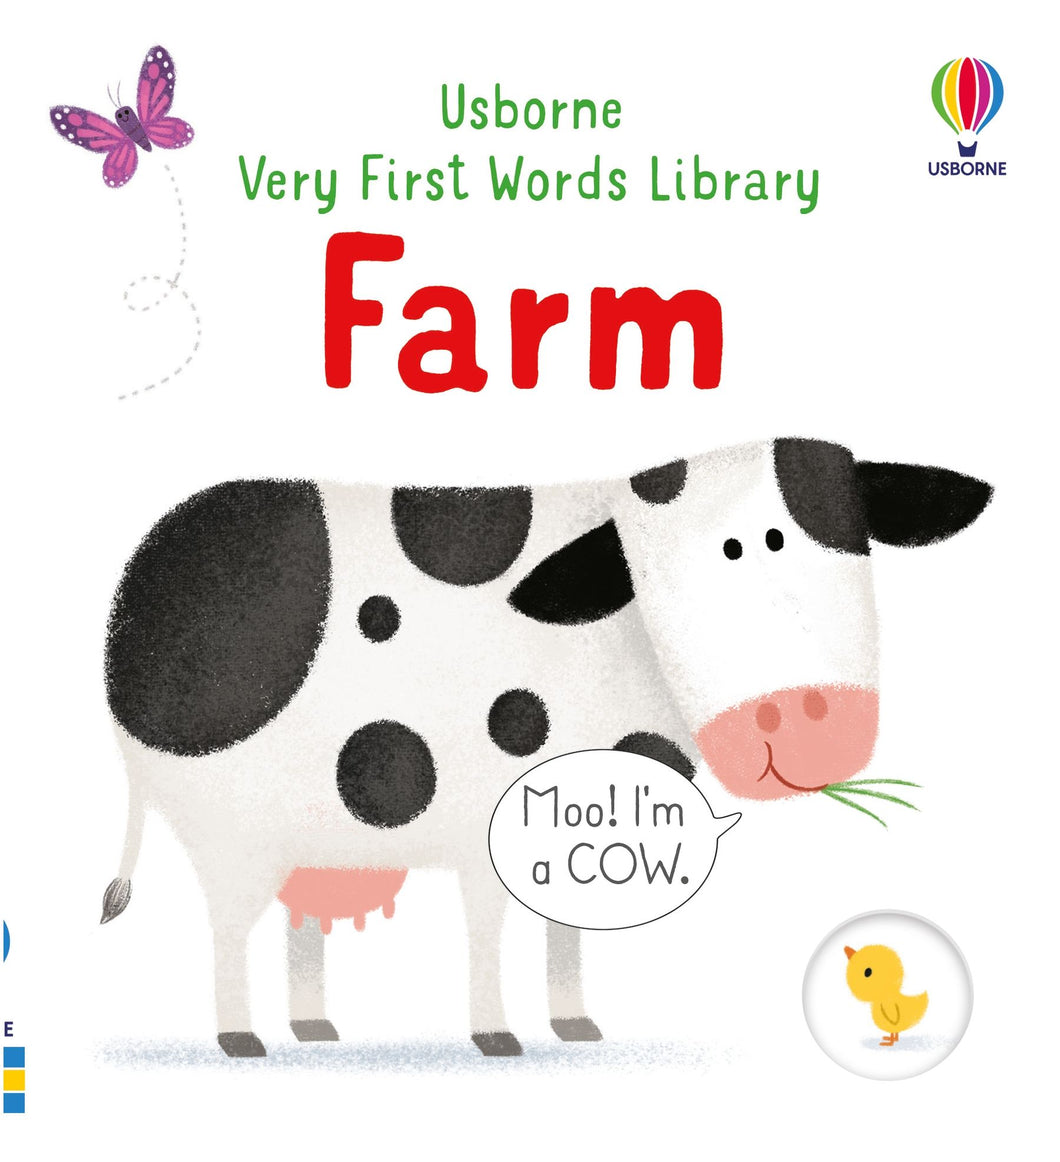 Very First Words Library Farm